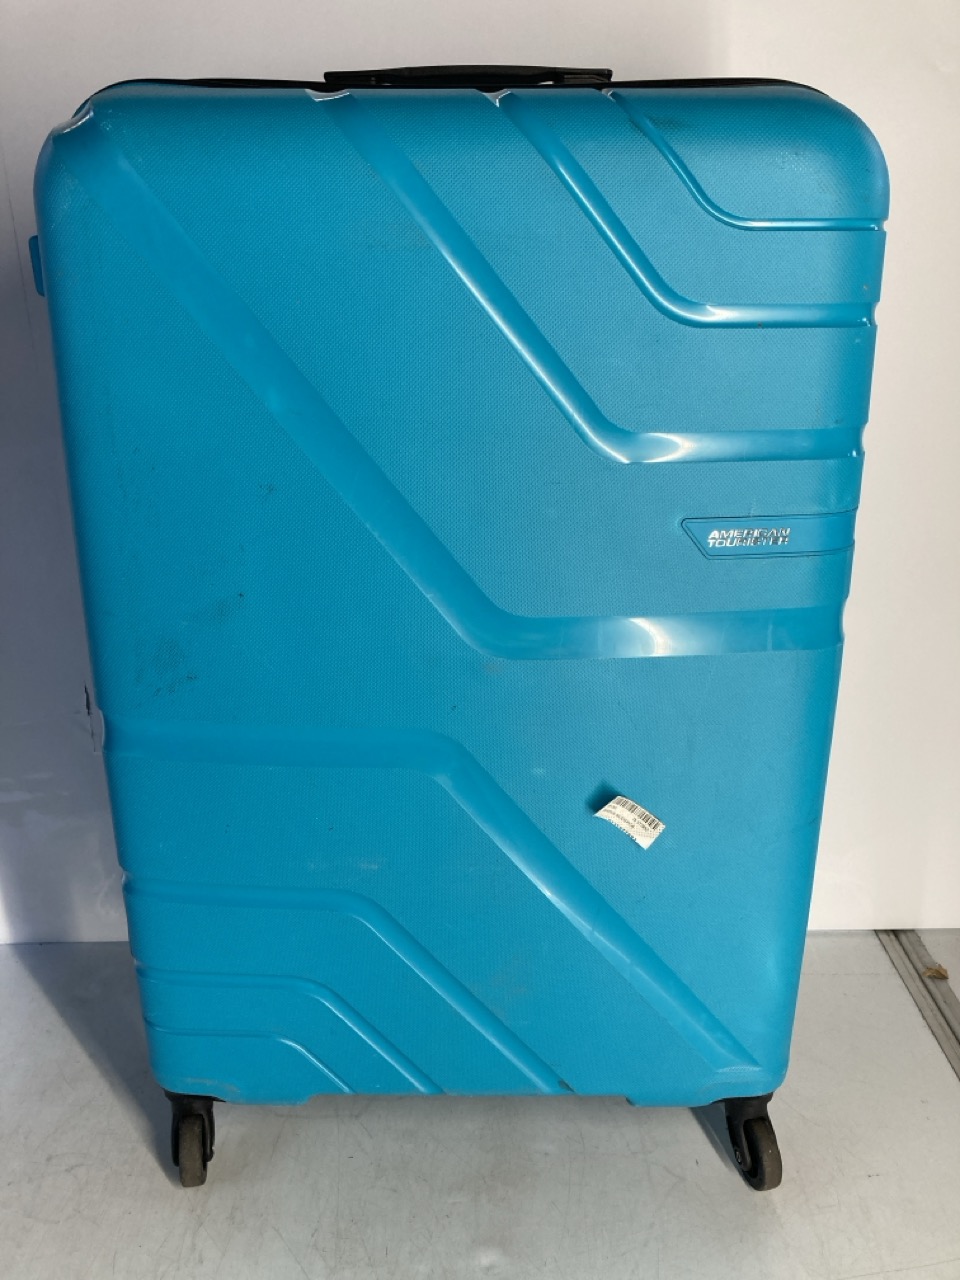 AMERICAN TOURISTER TURQUOISE LARGE SUITCASE